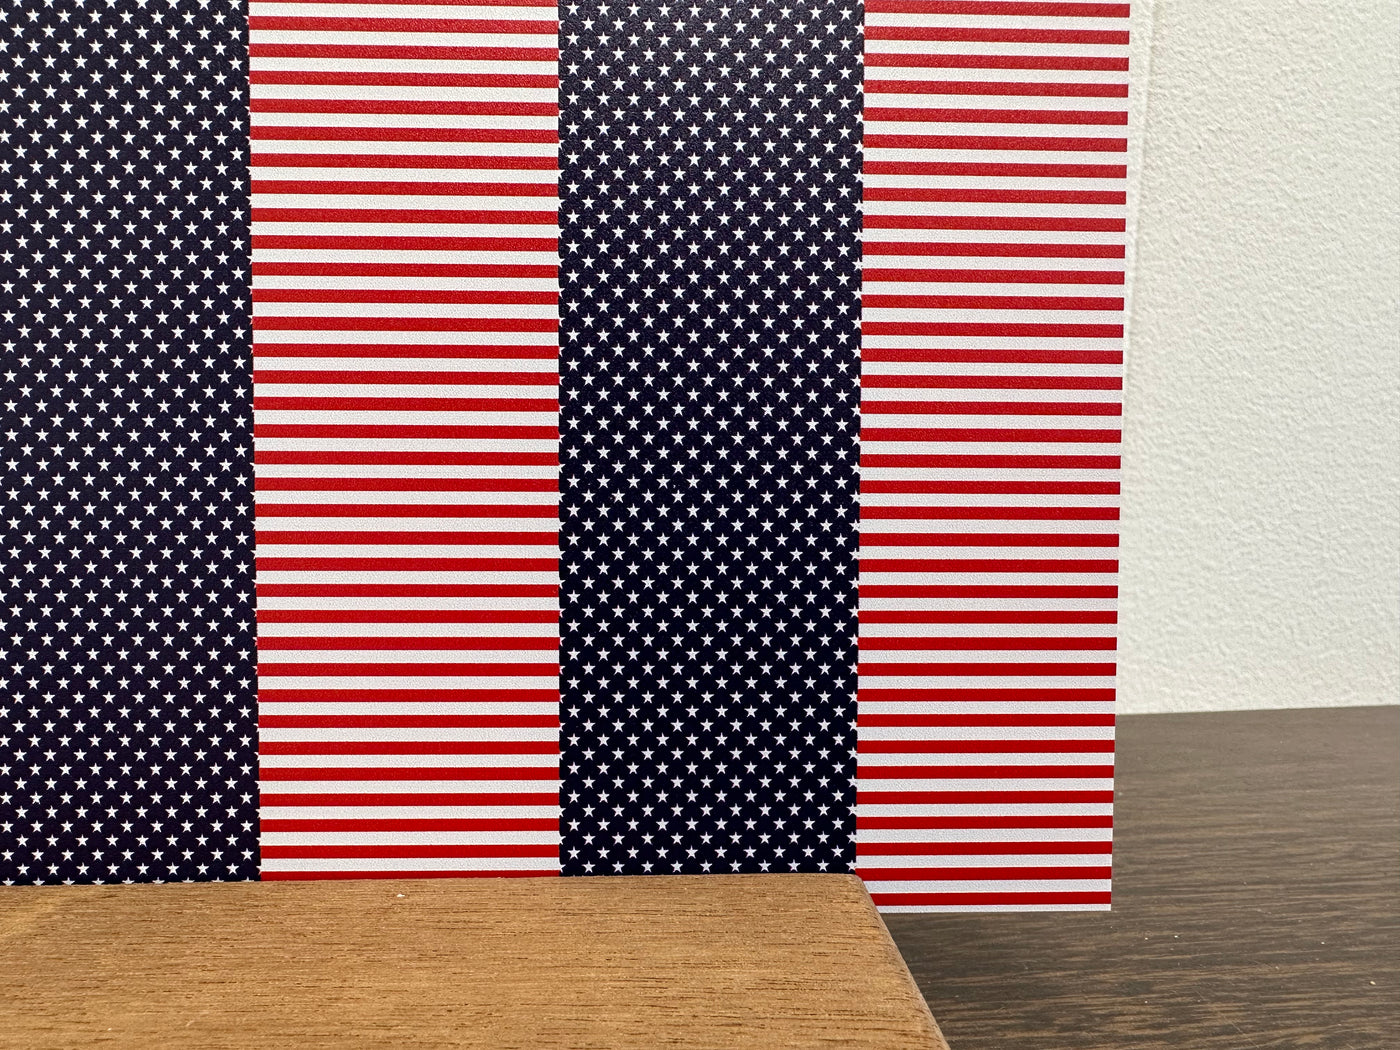 PatternPly® Micro US Flag Repeating with White Background